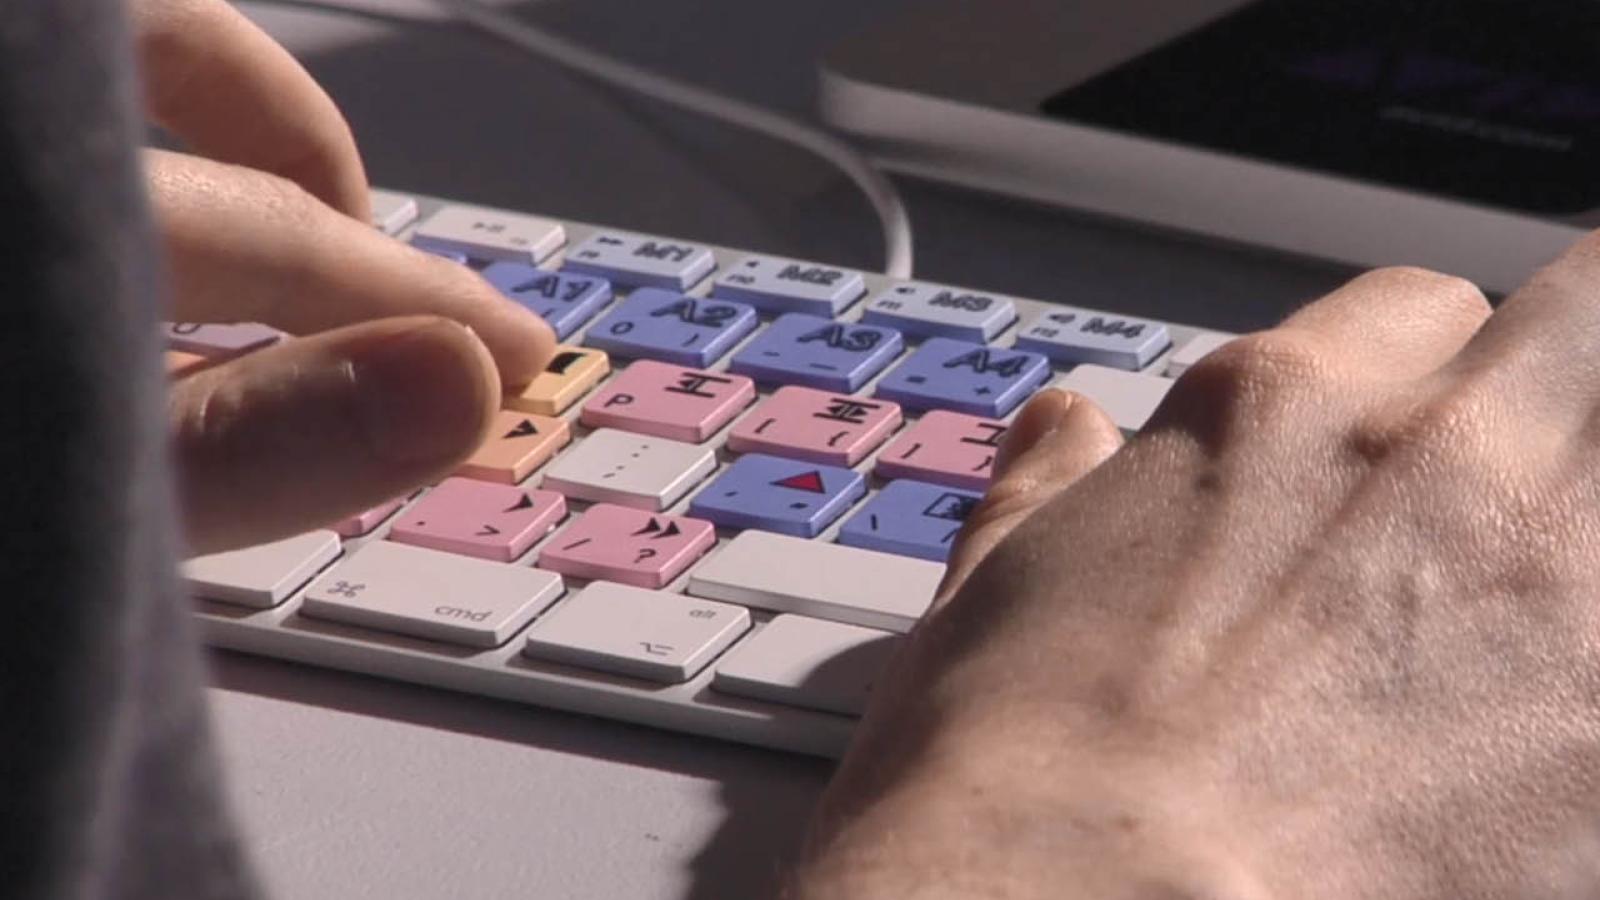 Close-up of a video editing keyboard in use